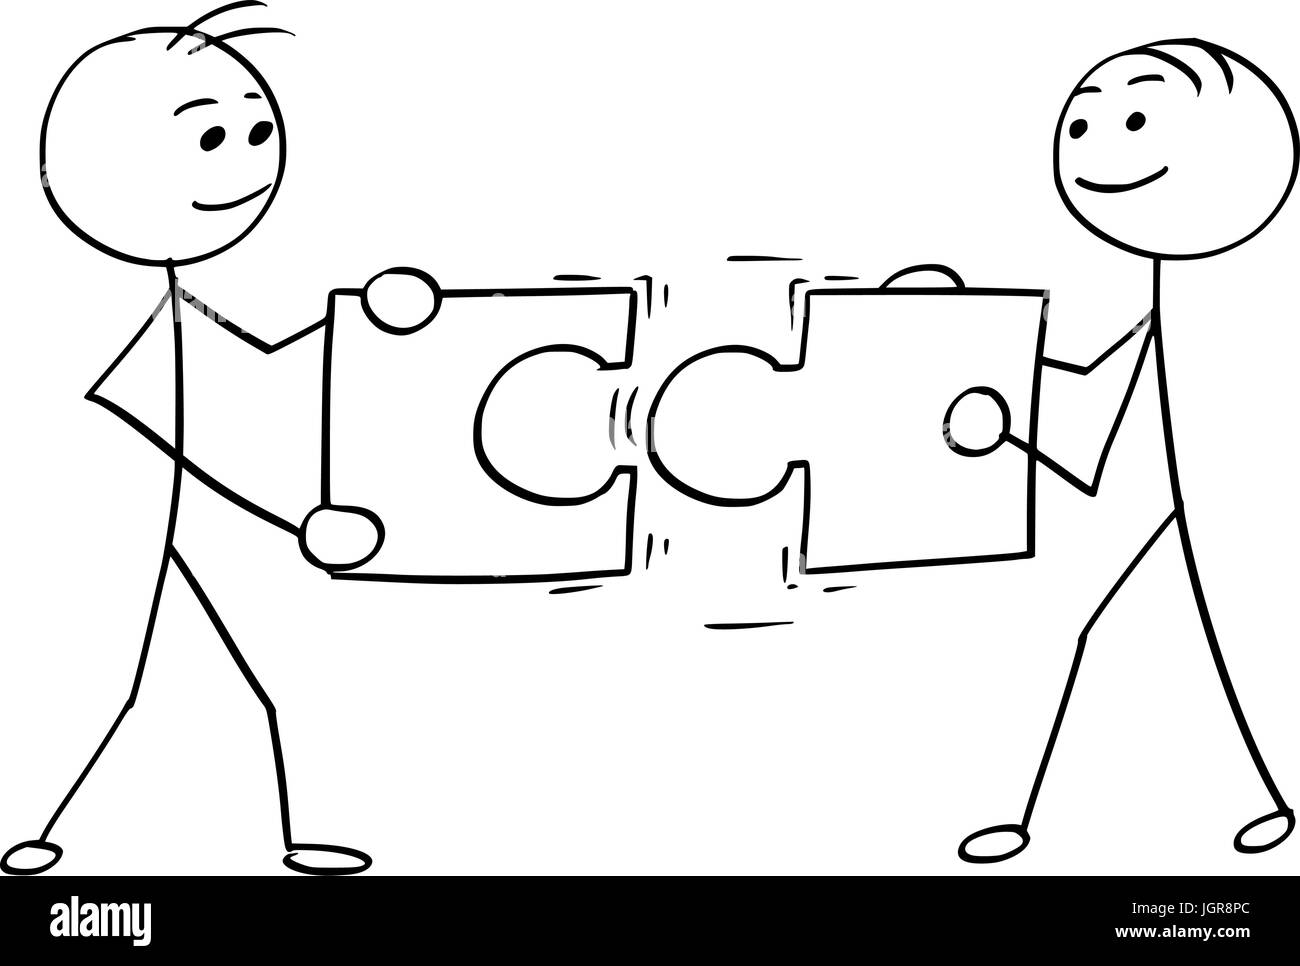 Cartoon vector stick man stickman drawing of two smiling men , each one holding a large jigsaw puzzle piece, trying to connect them together. Stock Vector